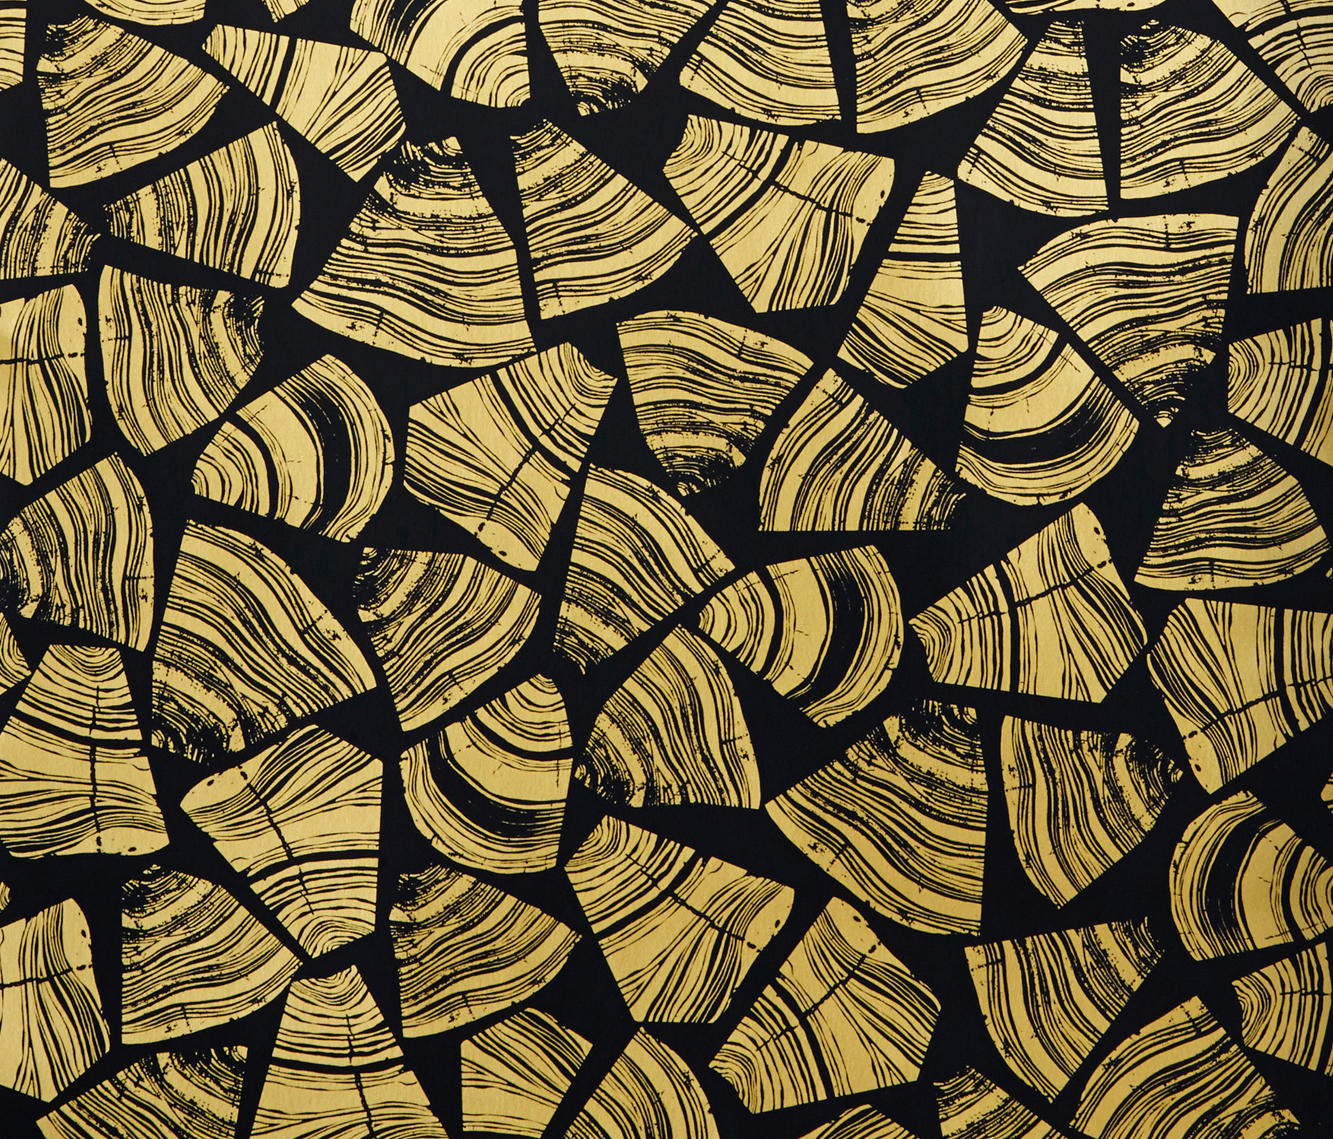 Black Wood And Gold - HD Wallpaper 